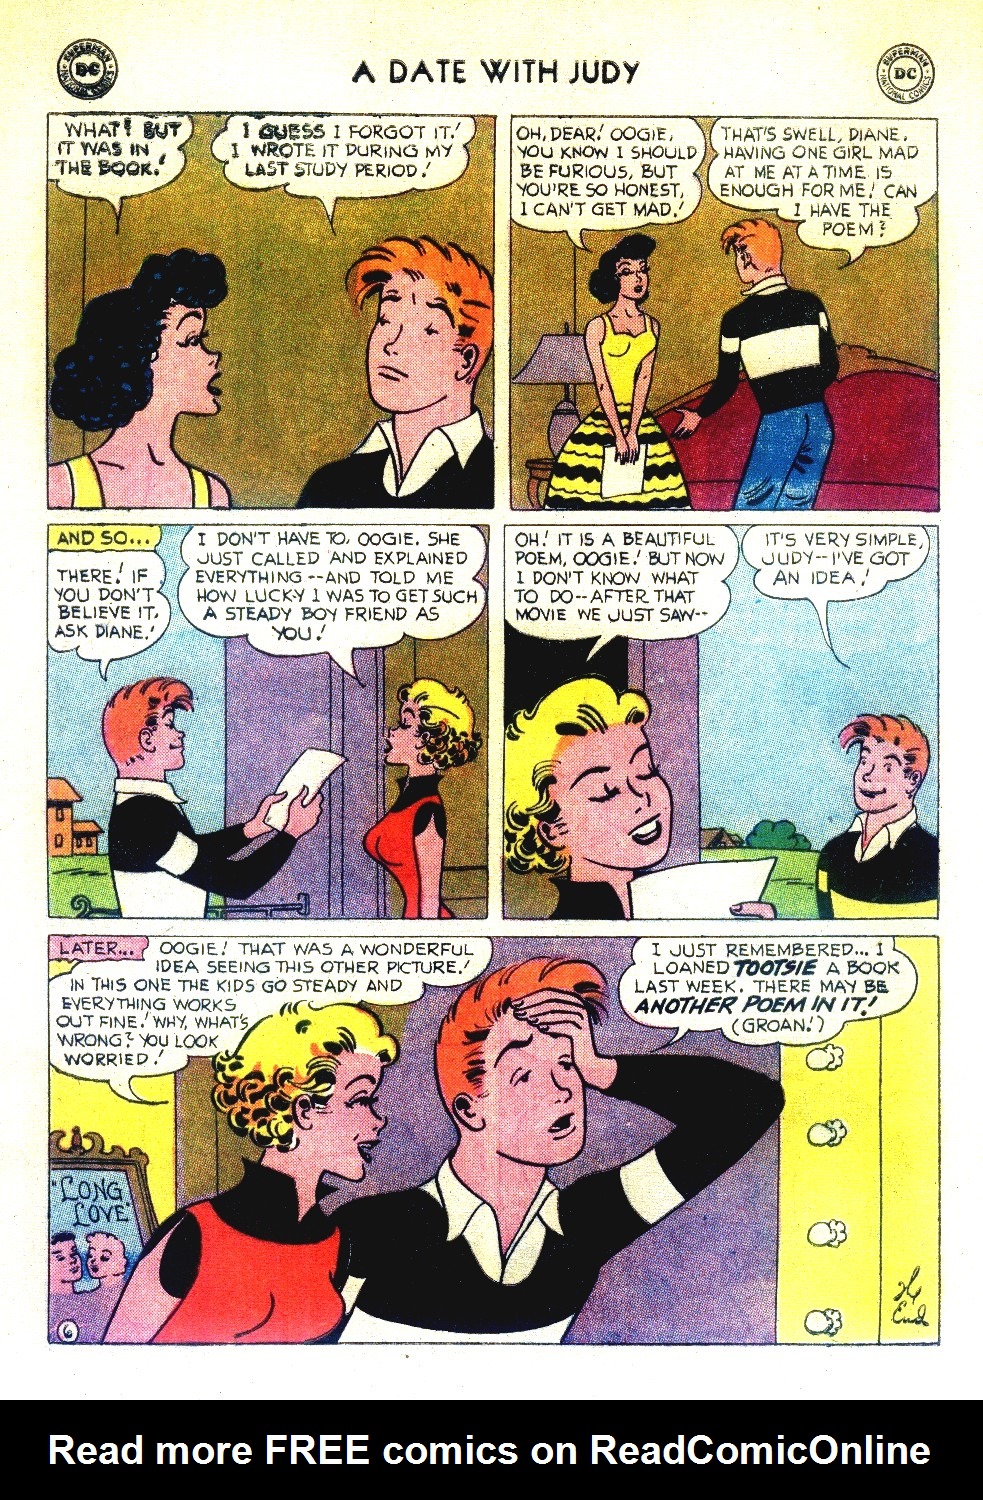 Read online A Date with Judy comic -  Issue #61 - 8